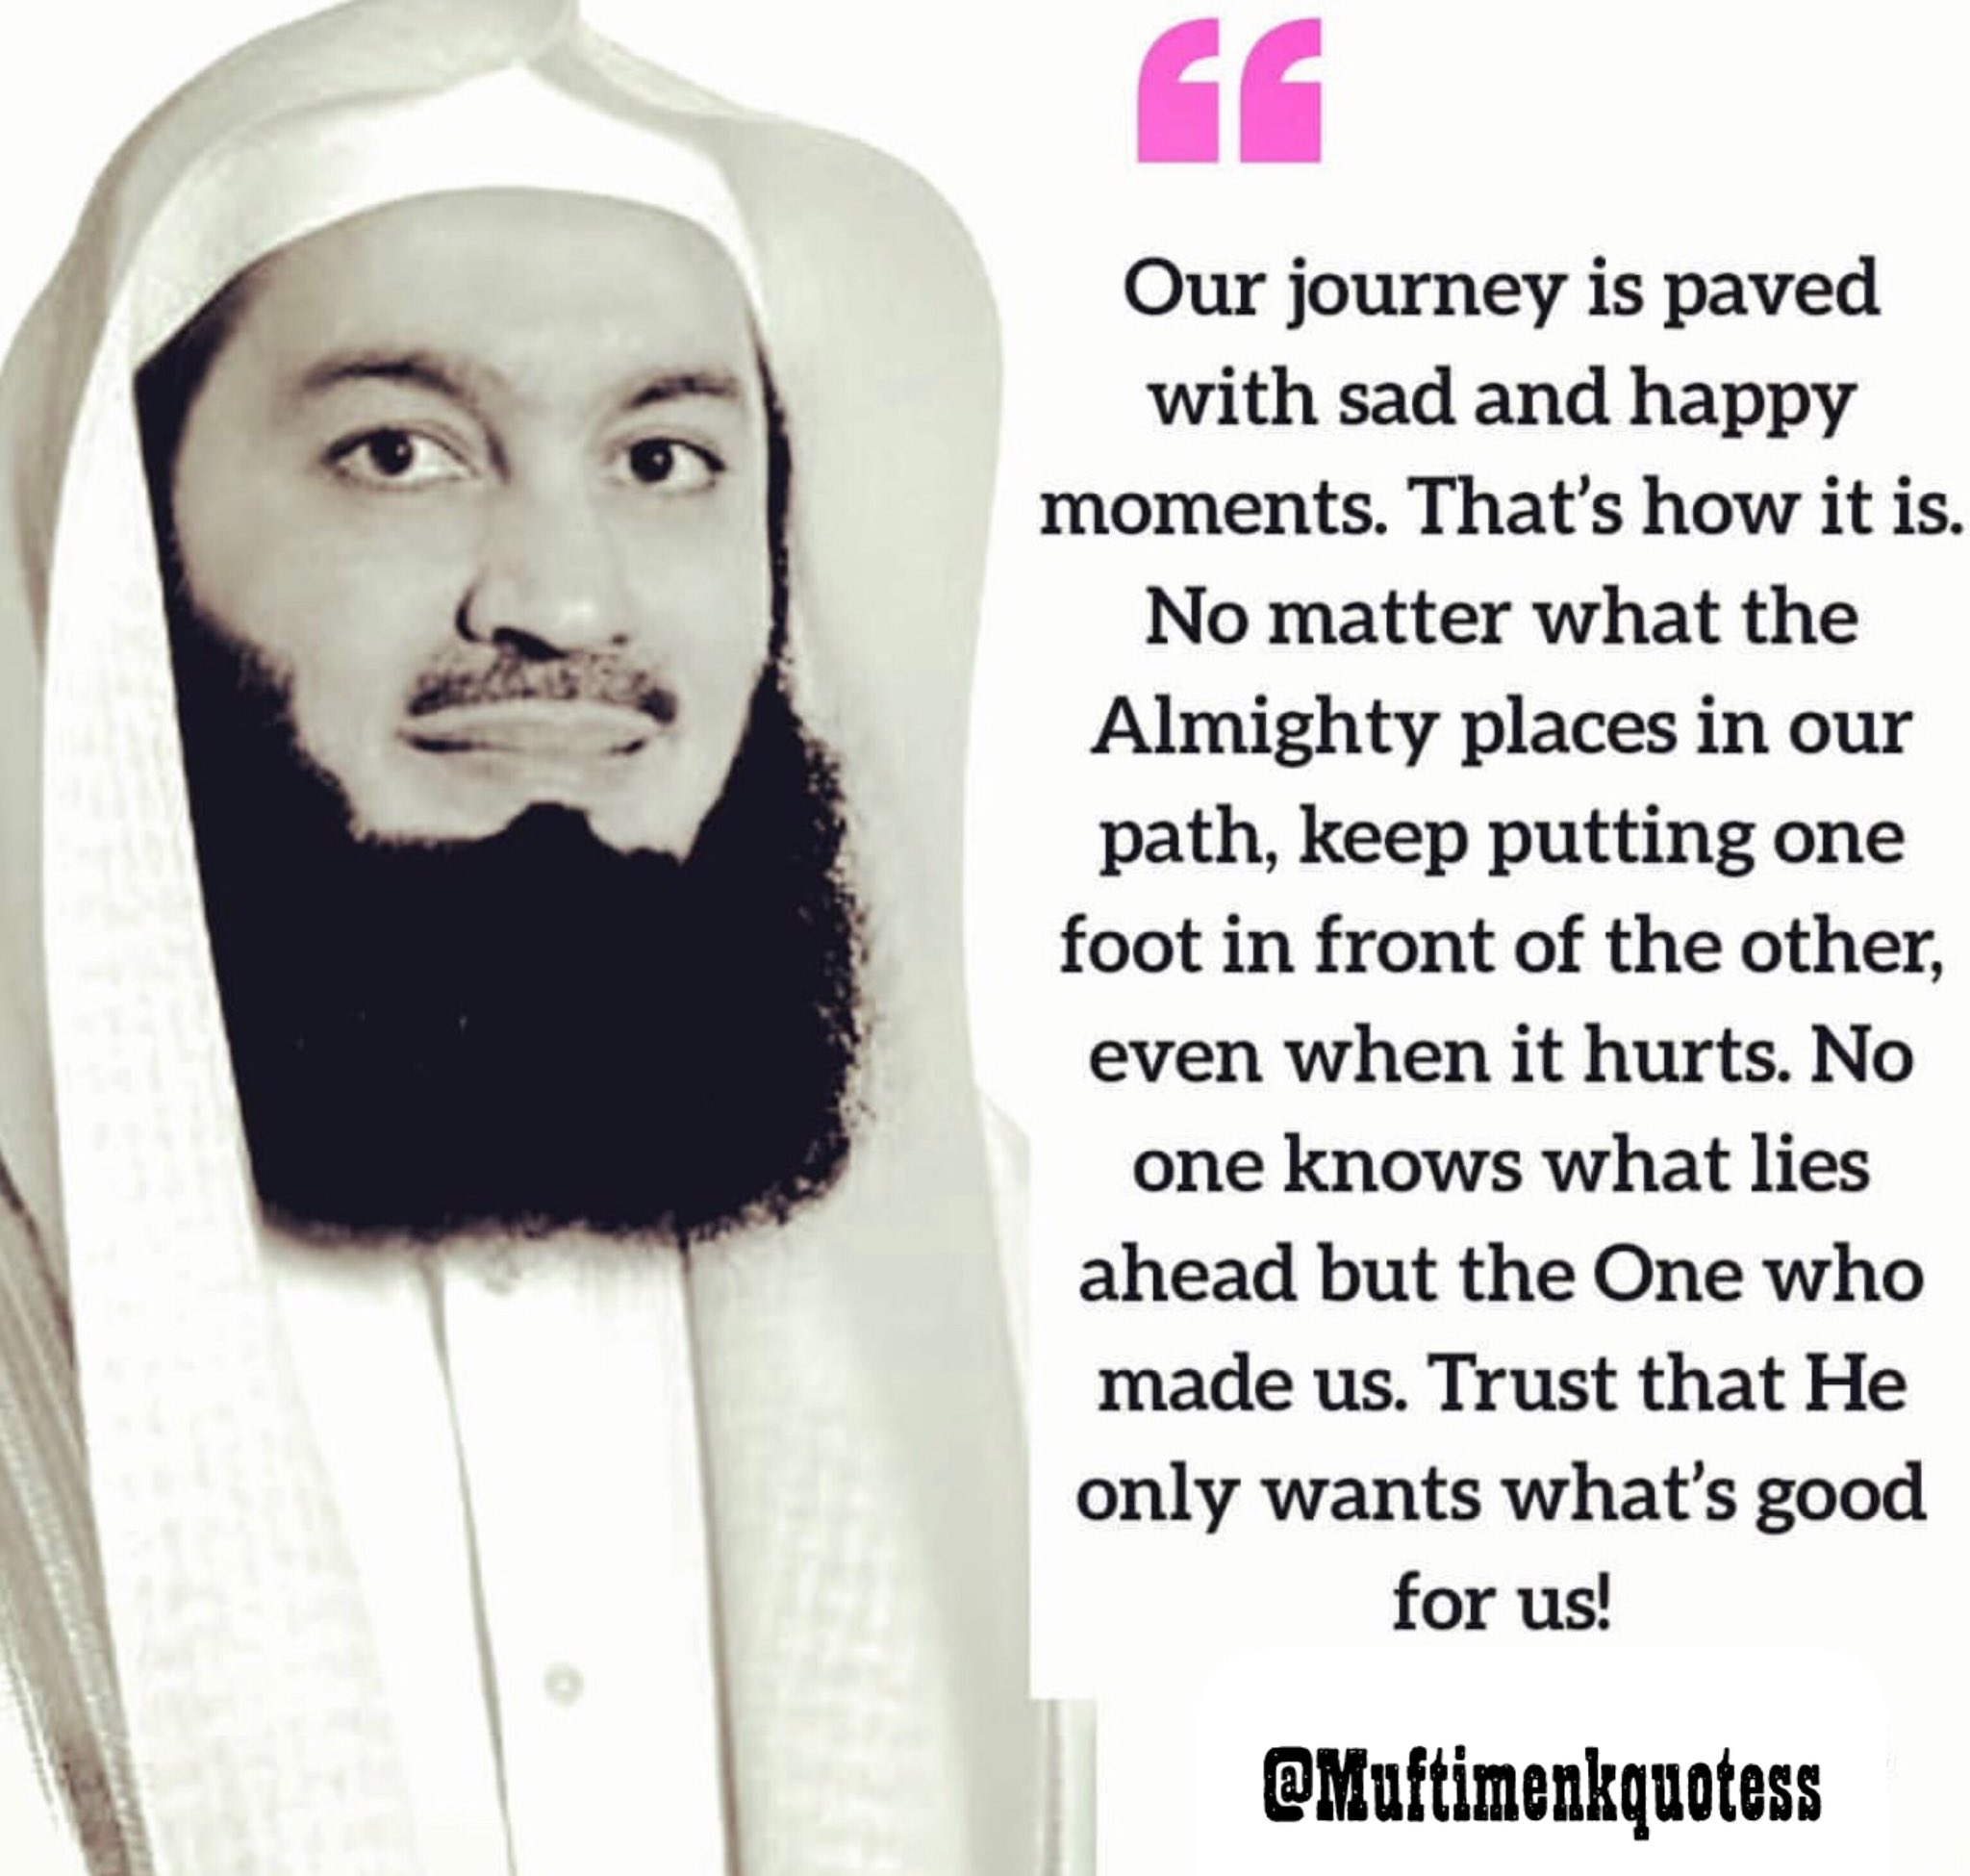 Mufti Menk On Twitter: "It's Natural To Feel Unsure And Uncertain About What Life Has To Offer. We're Human After All. Come To Terms With It But Don't Let It Engulf You.